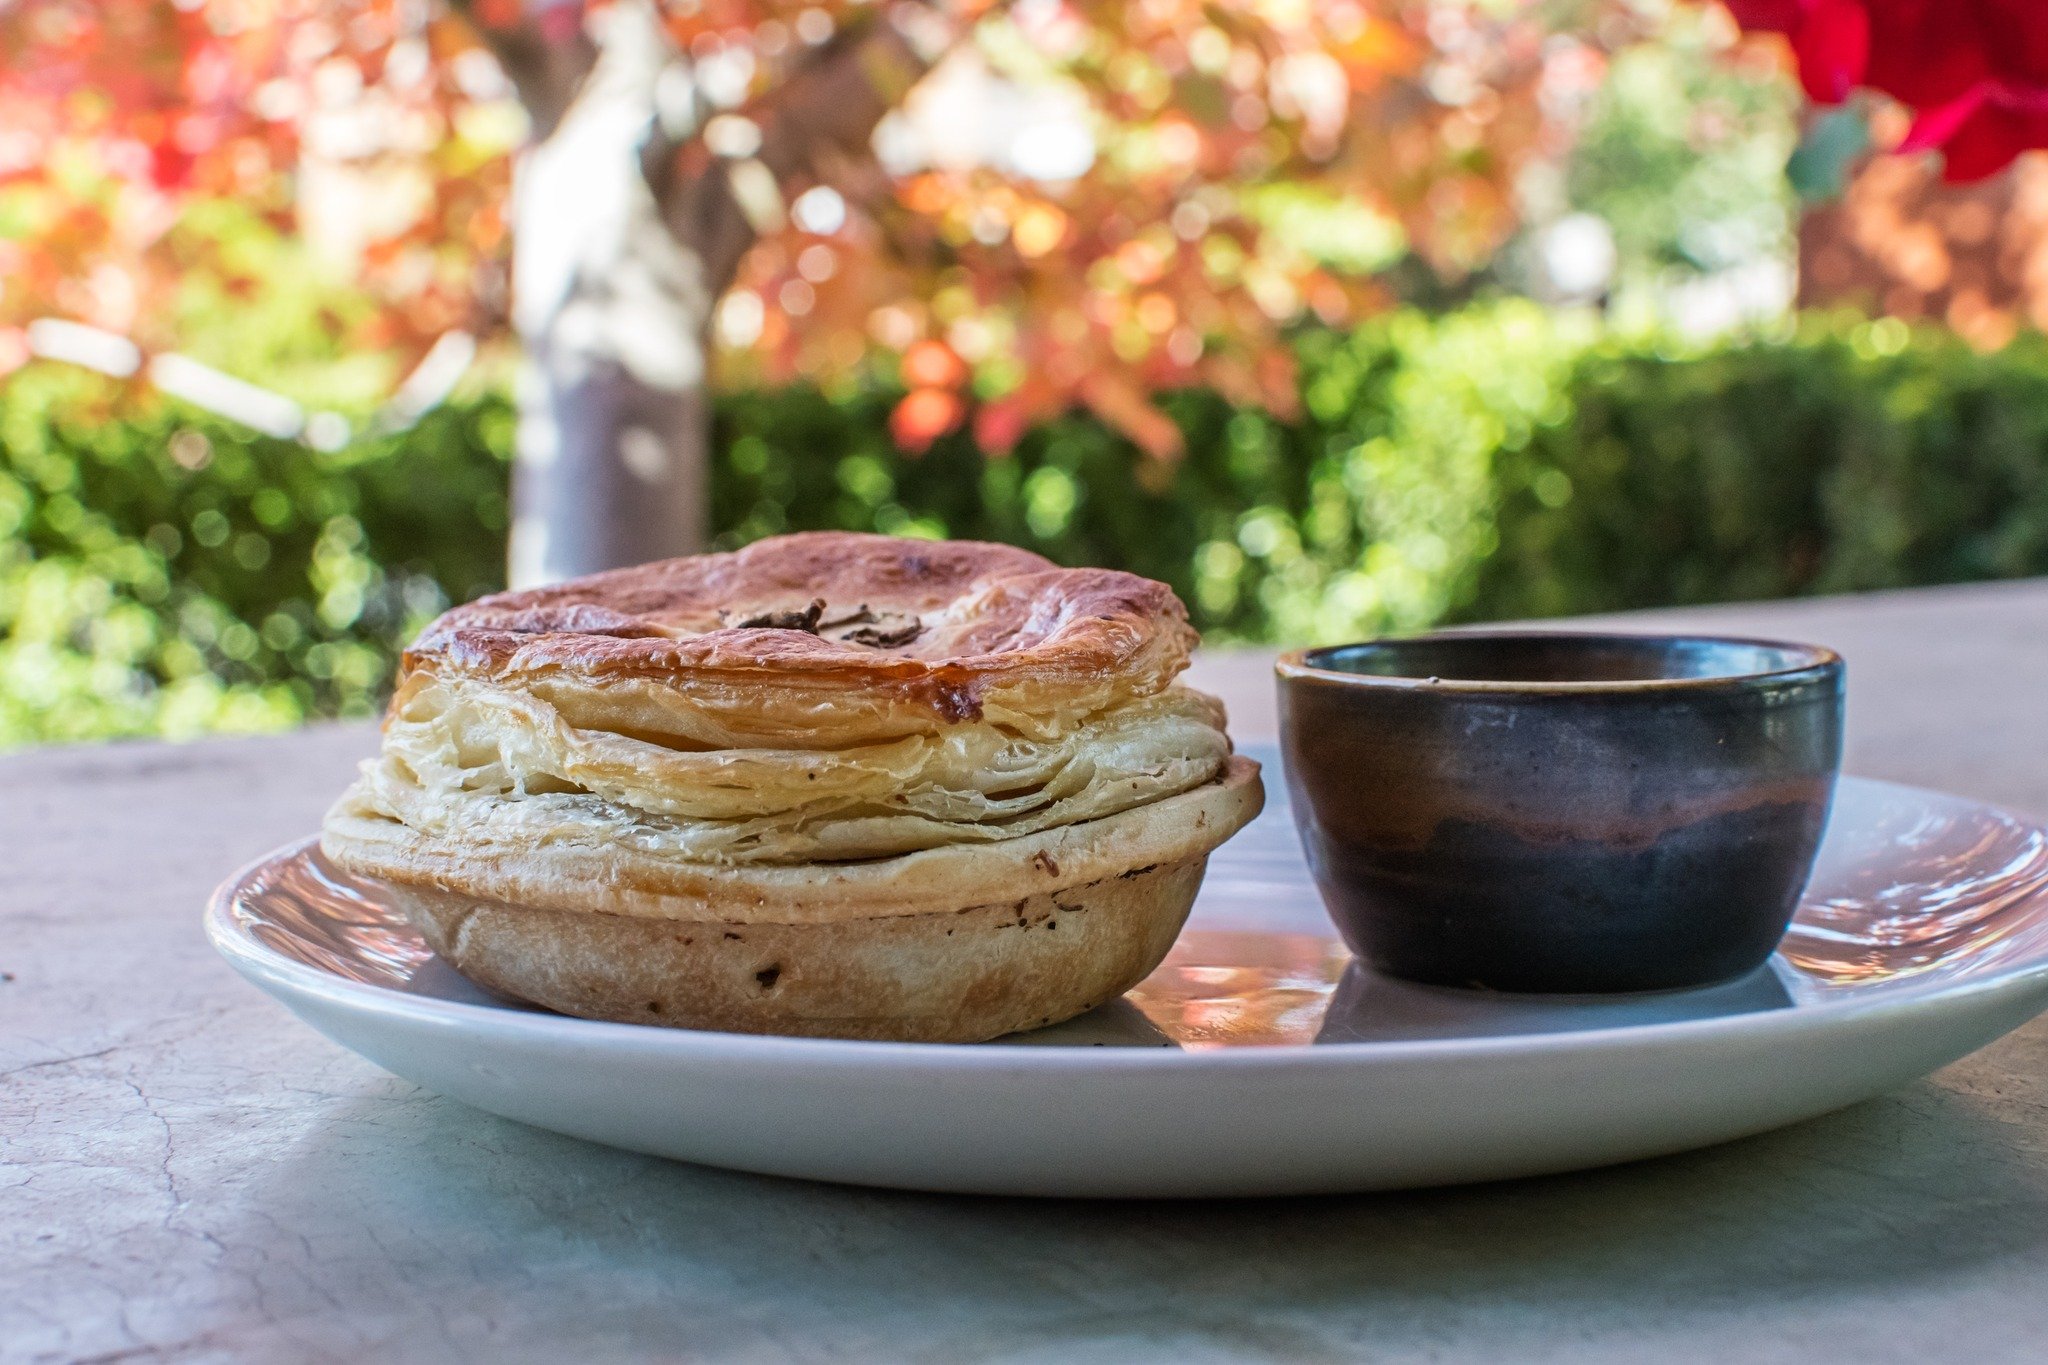 🥧 A fresh hot pie on a crisp Autumn Gisborne morning - perfect! 🍂
.
.
.
#freshpastry #cafepastry #cafetreats #escapetothecountry #seeVictoria #VisitMacedonRanges #MacedonRangesNaturallyCool #macedonranges #VisitMelbourne #VisitVictoria #ThisIsVicto